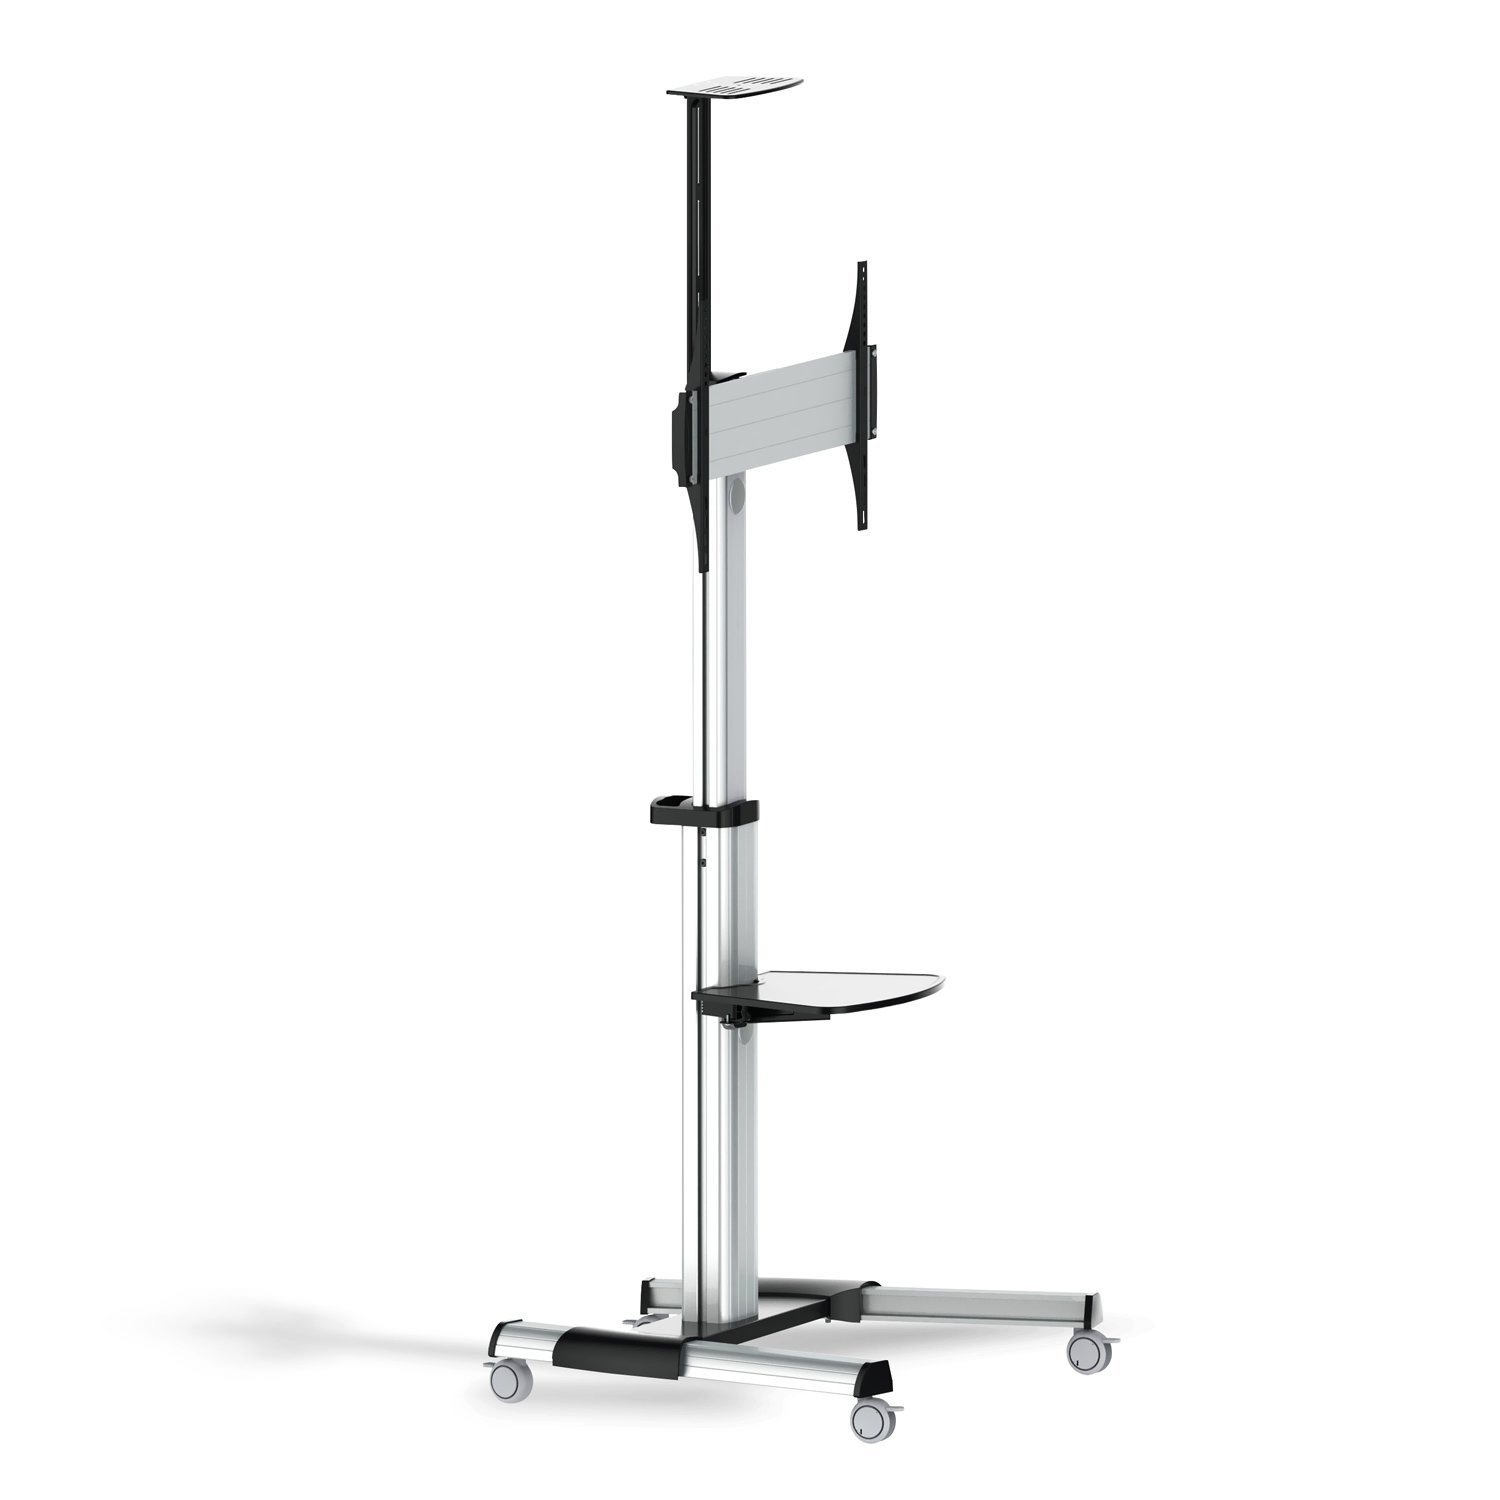 Aisens Eco Floor Stand with Wheels - DVD Tray and Camera Stand (37?-70? TV) - Silver Color